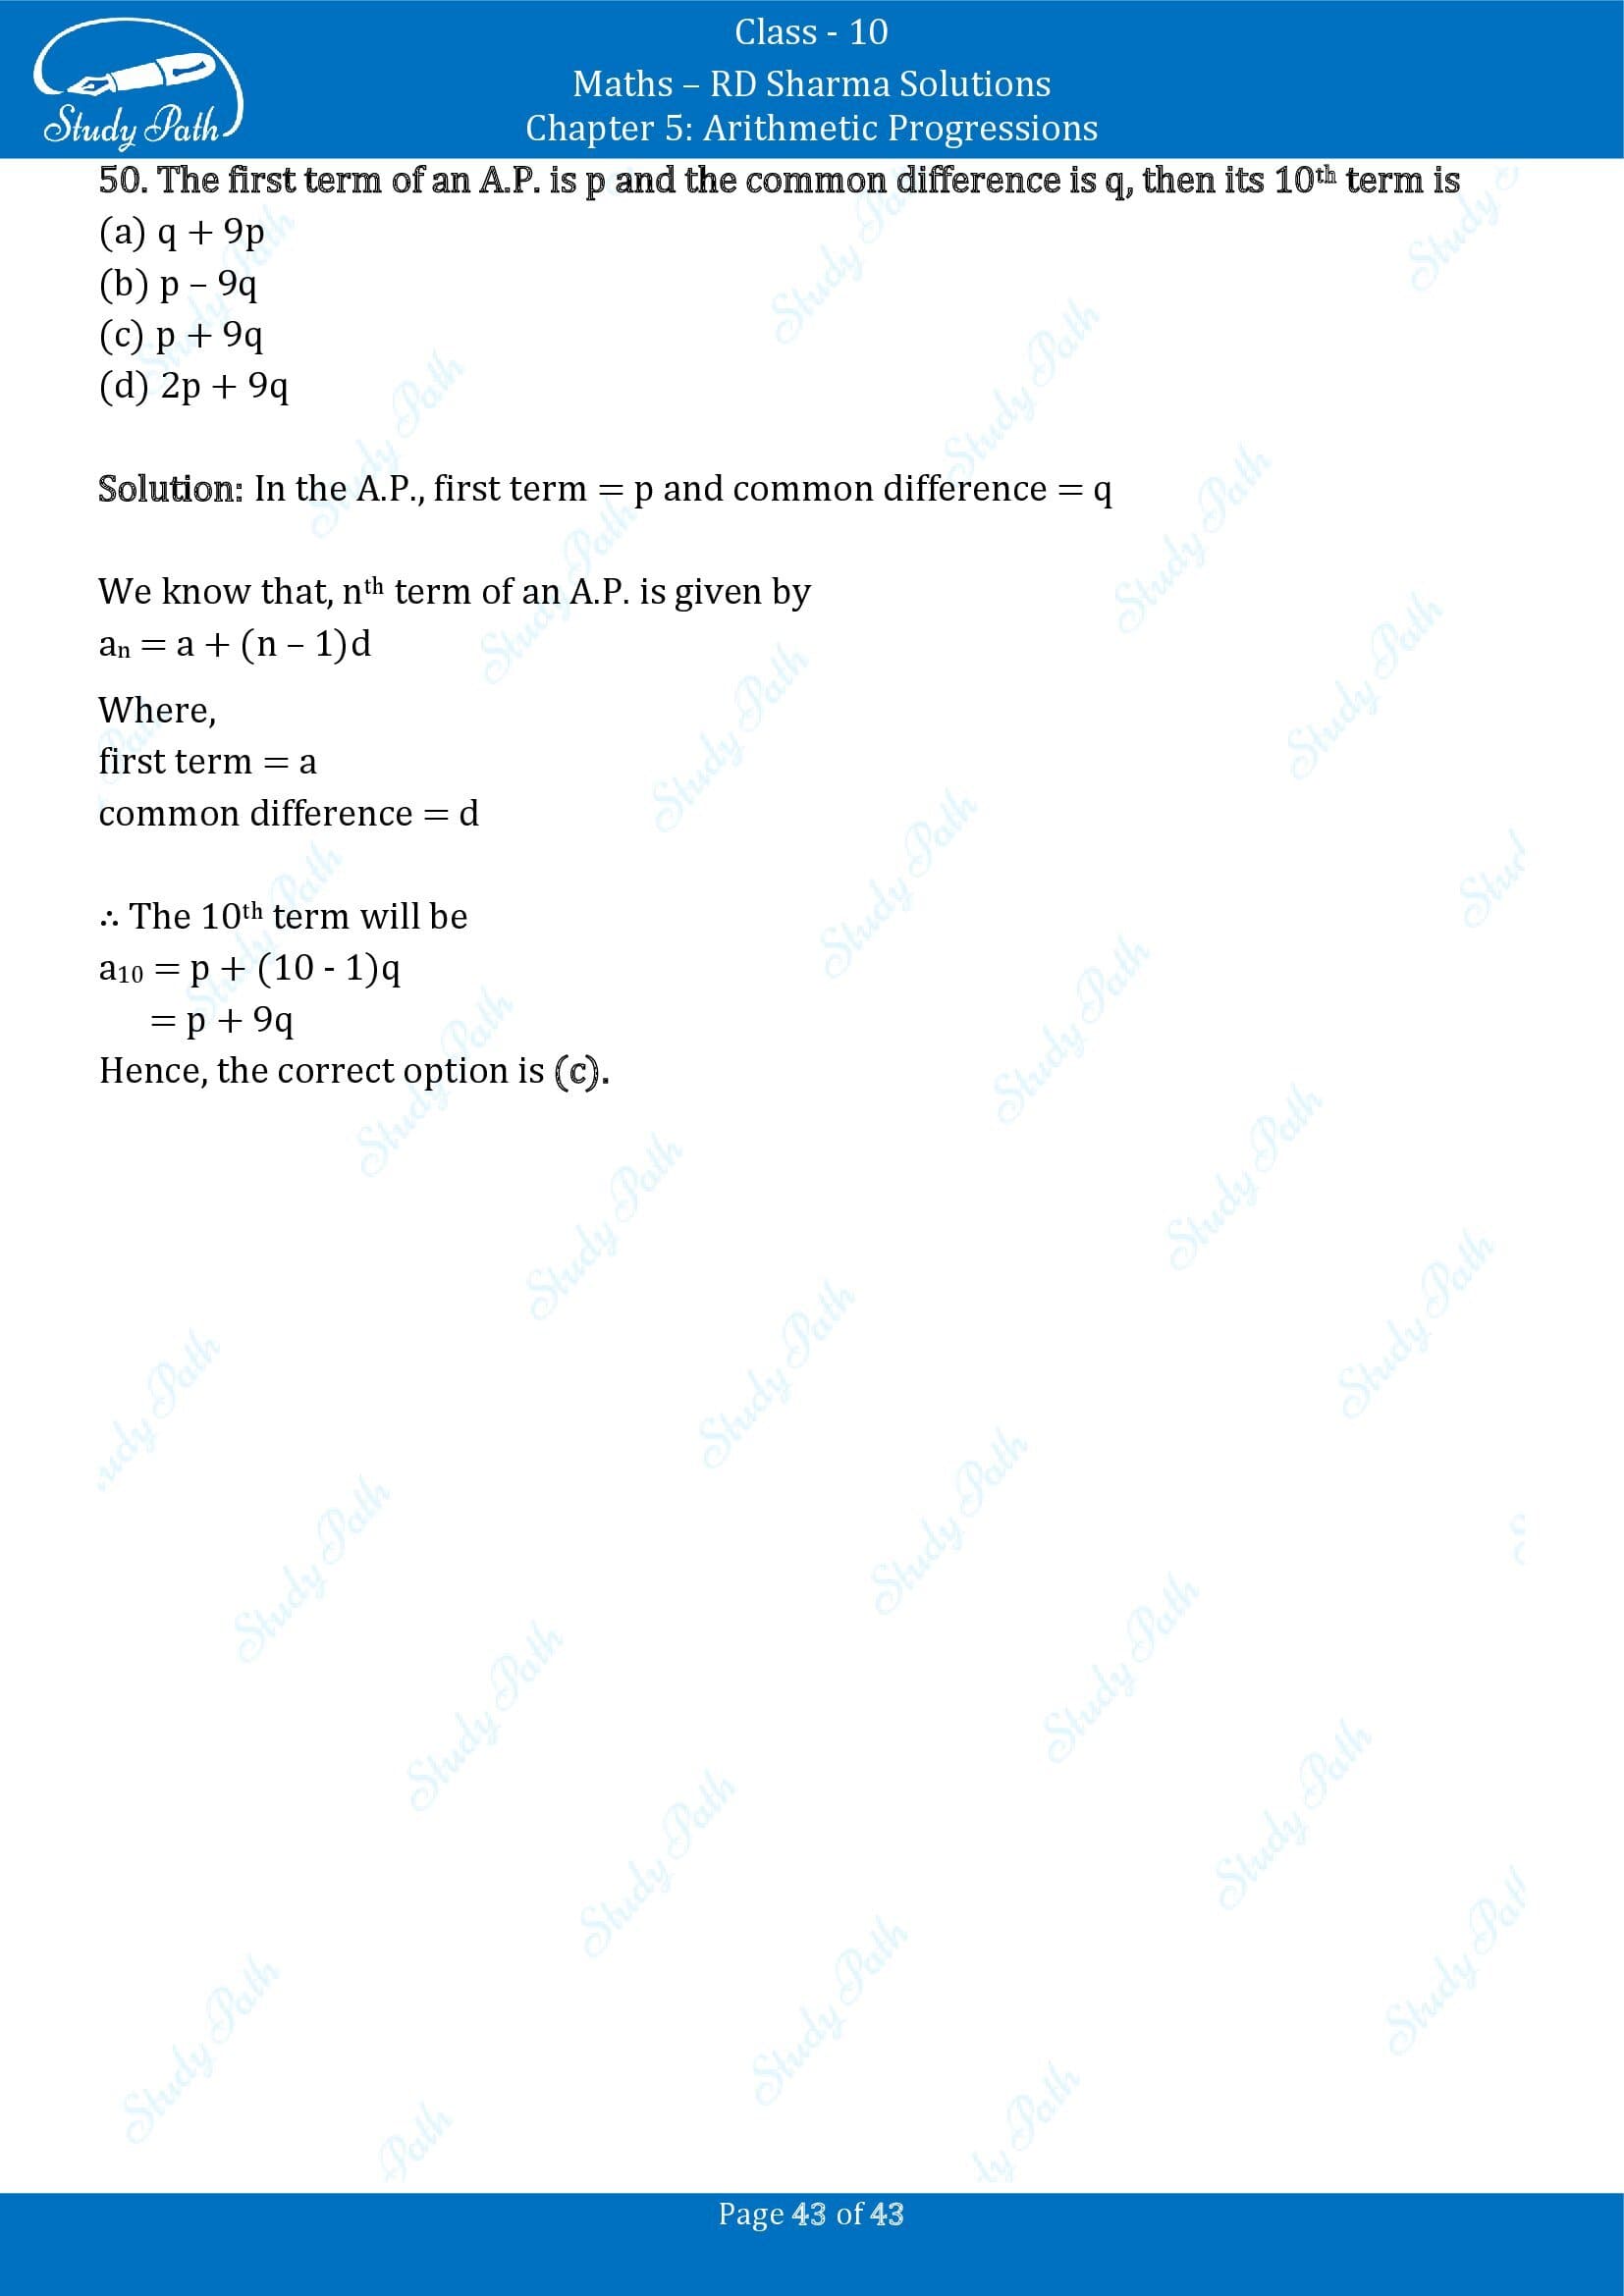 RD Sharma Solutions Class 10 Chapter 5 Arithmetic Progressions Multiple Choice Question MCQs 00043